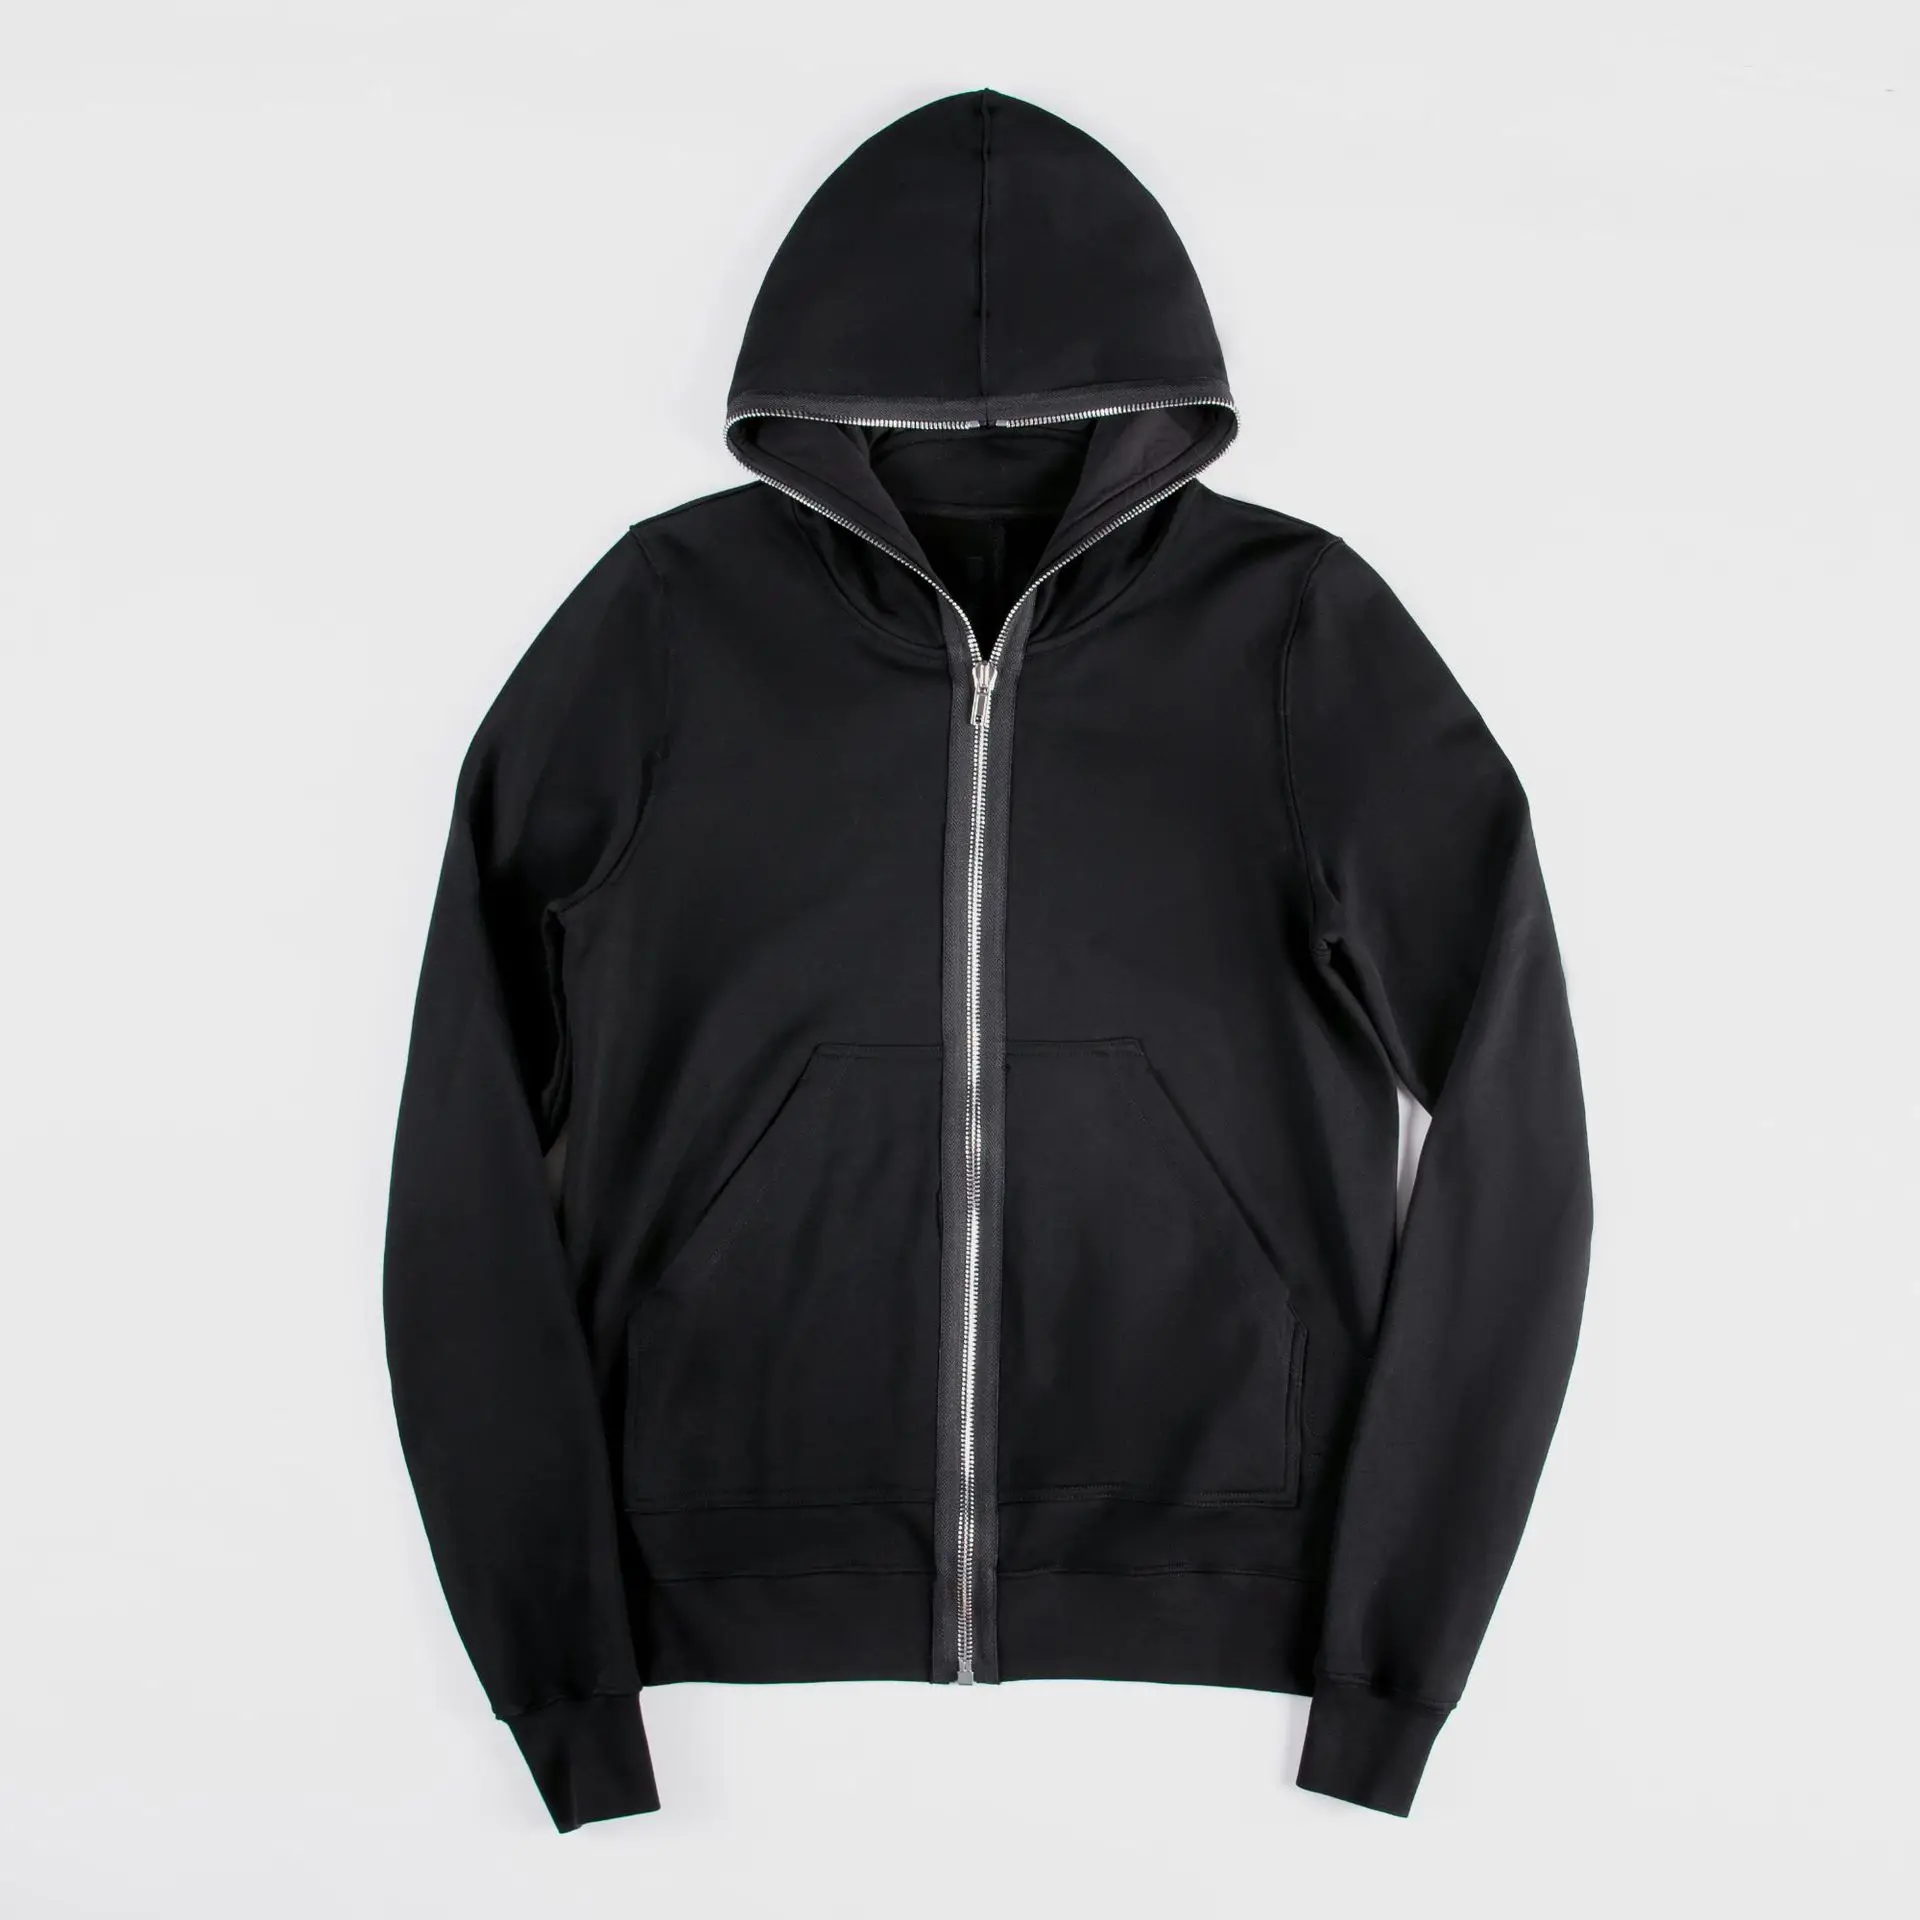 New High Quality Custom Black Hiphop Clothing Blank Full Face Zip Up